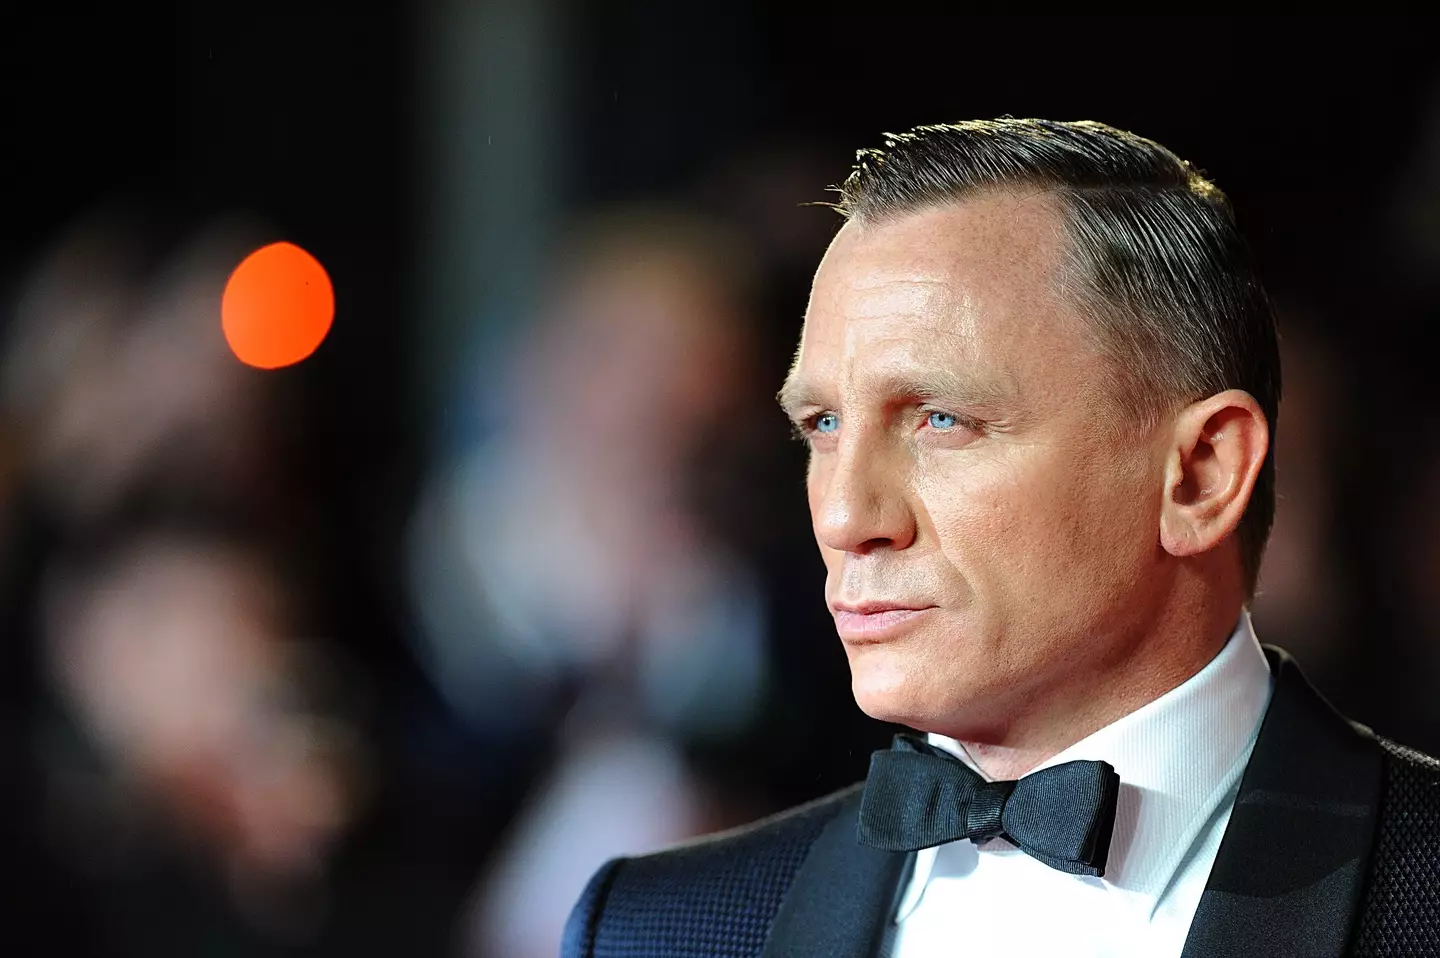 Daniel Craig's replacement as James Bond will be the first 007 to serve a King and not a Queen.